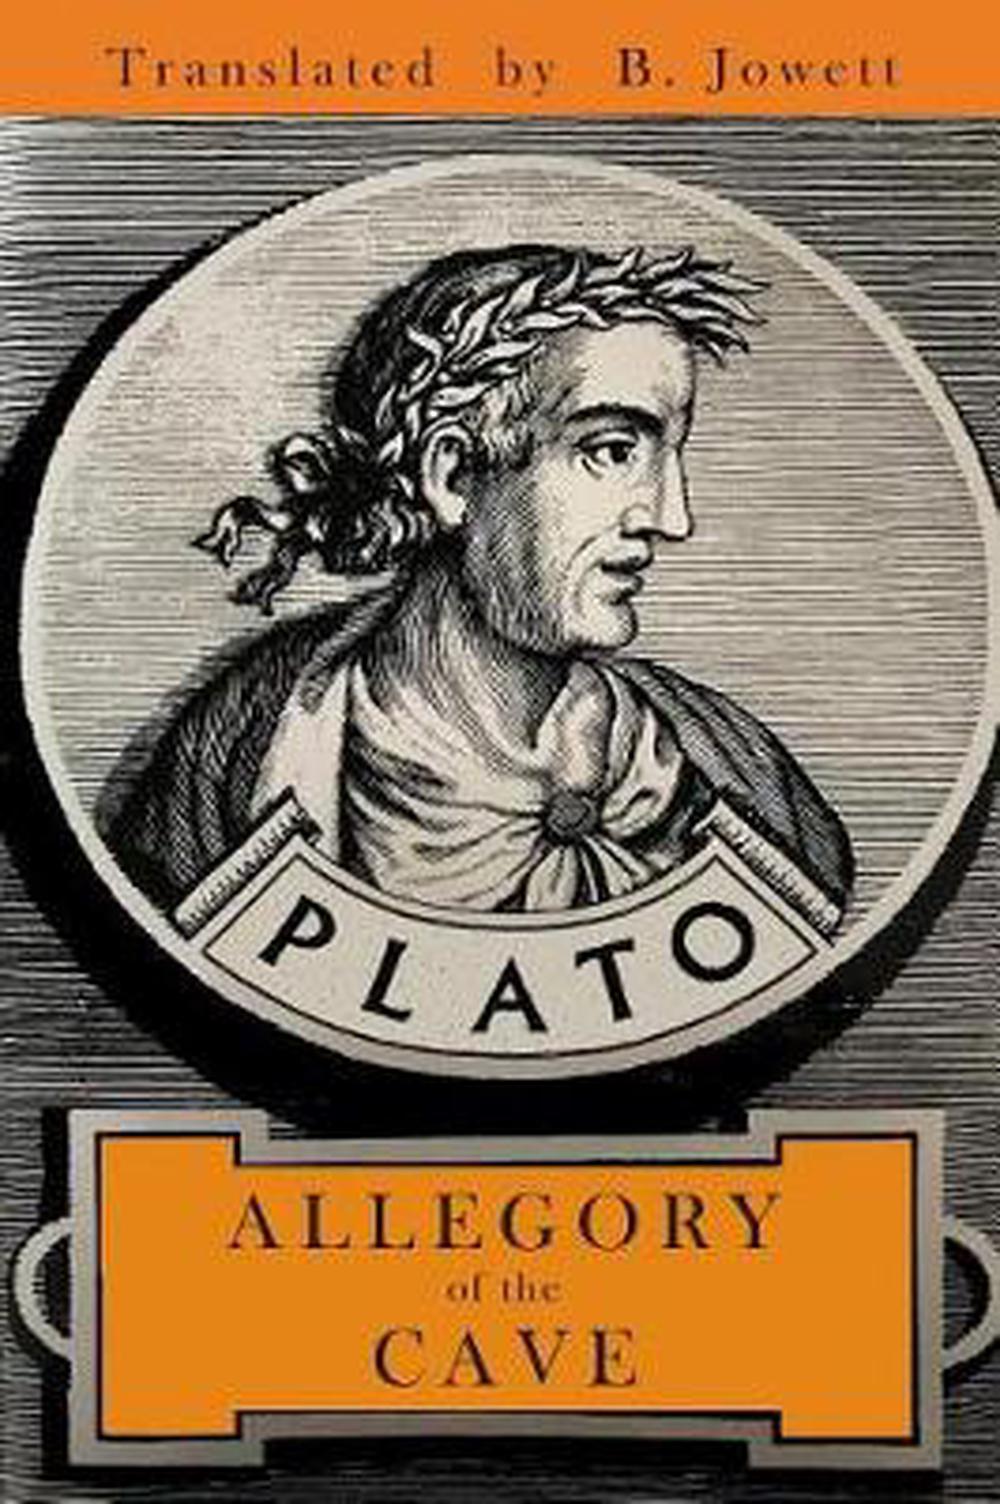 plato allegory of the cave